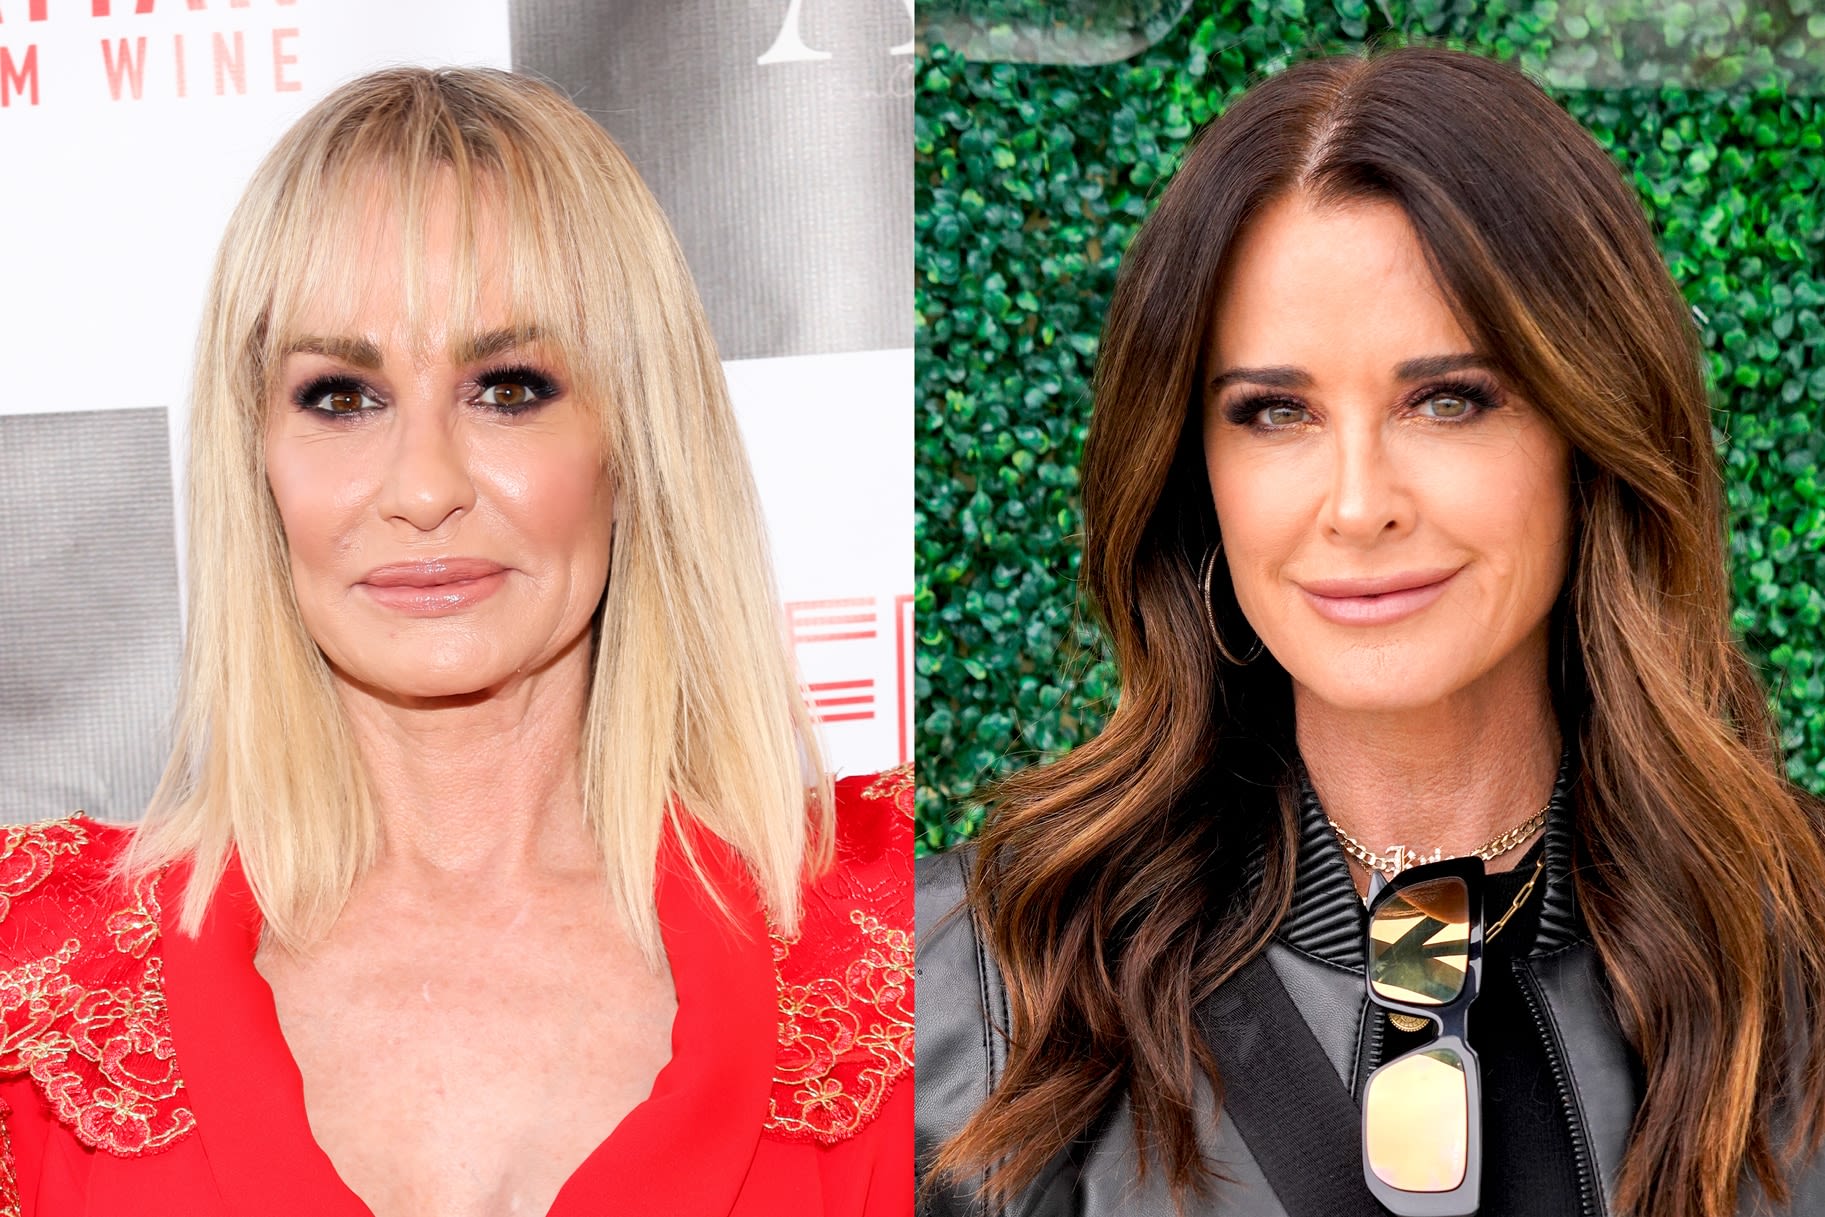 Taylor Armstrong Reveals Her Advice For Kyle Richards: Take a "Break" | Bravo TV Official Site